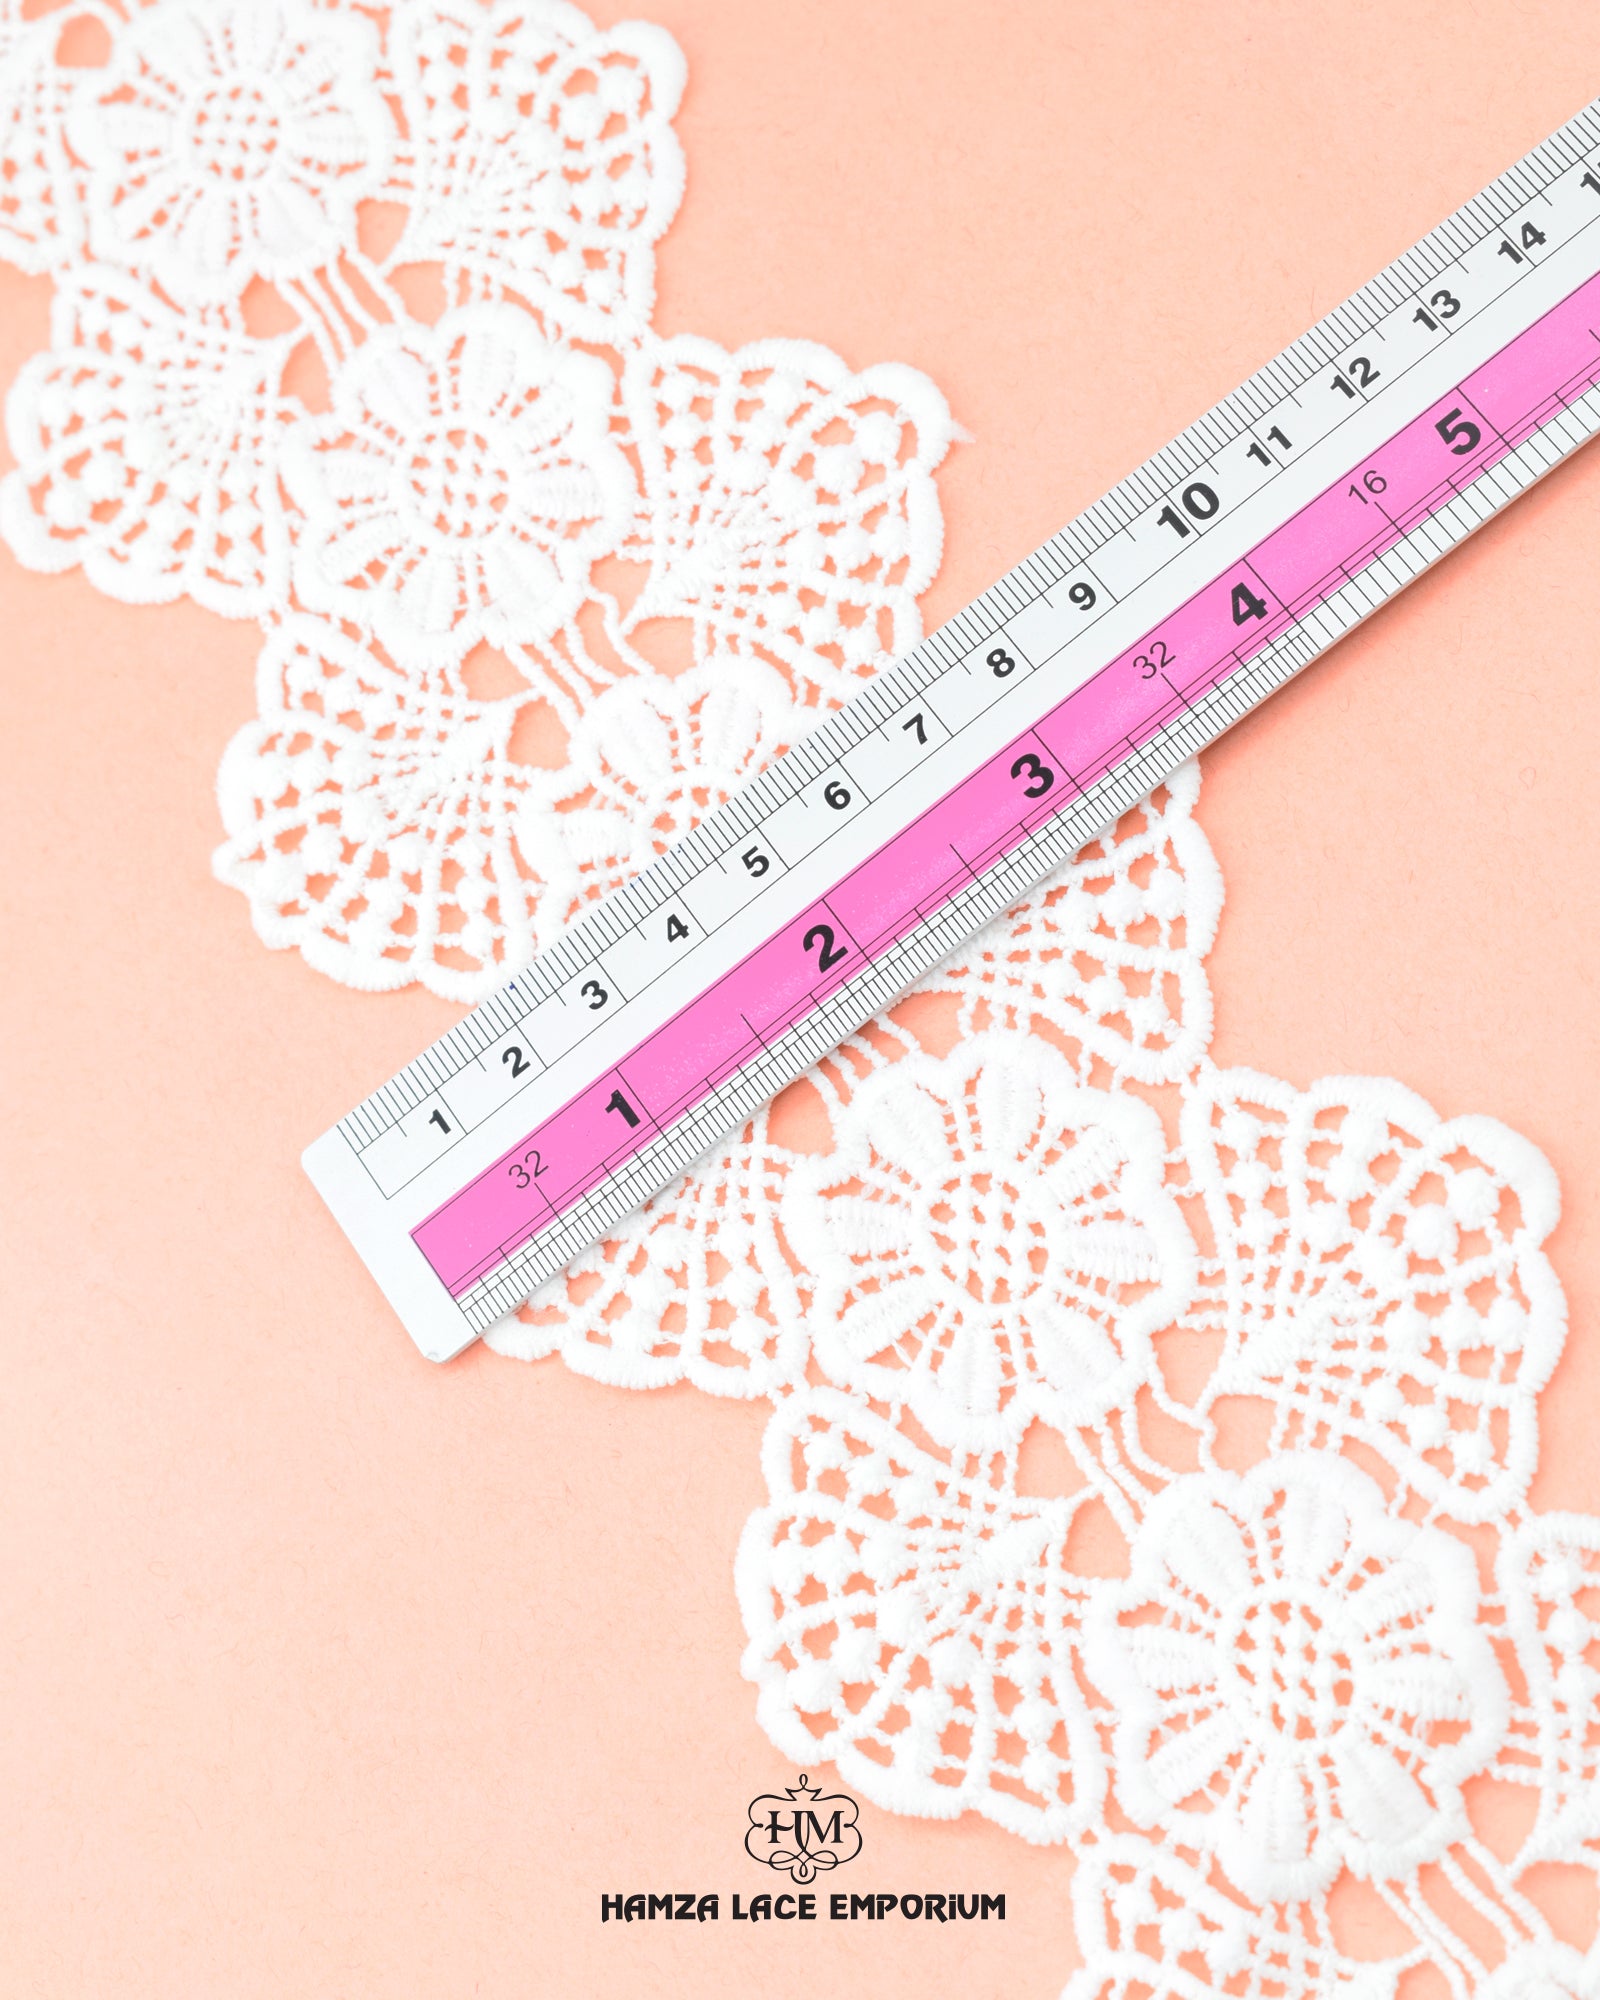 Using a scale, the size of the 'Center Filling Lace 23399' is shown